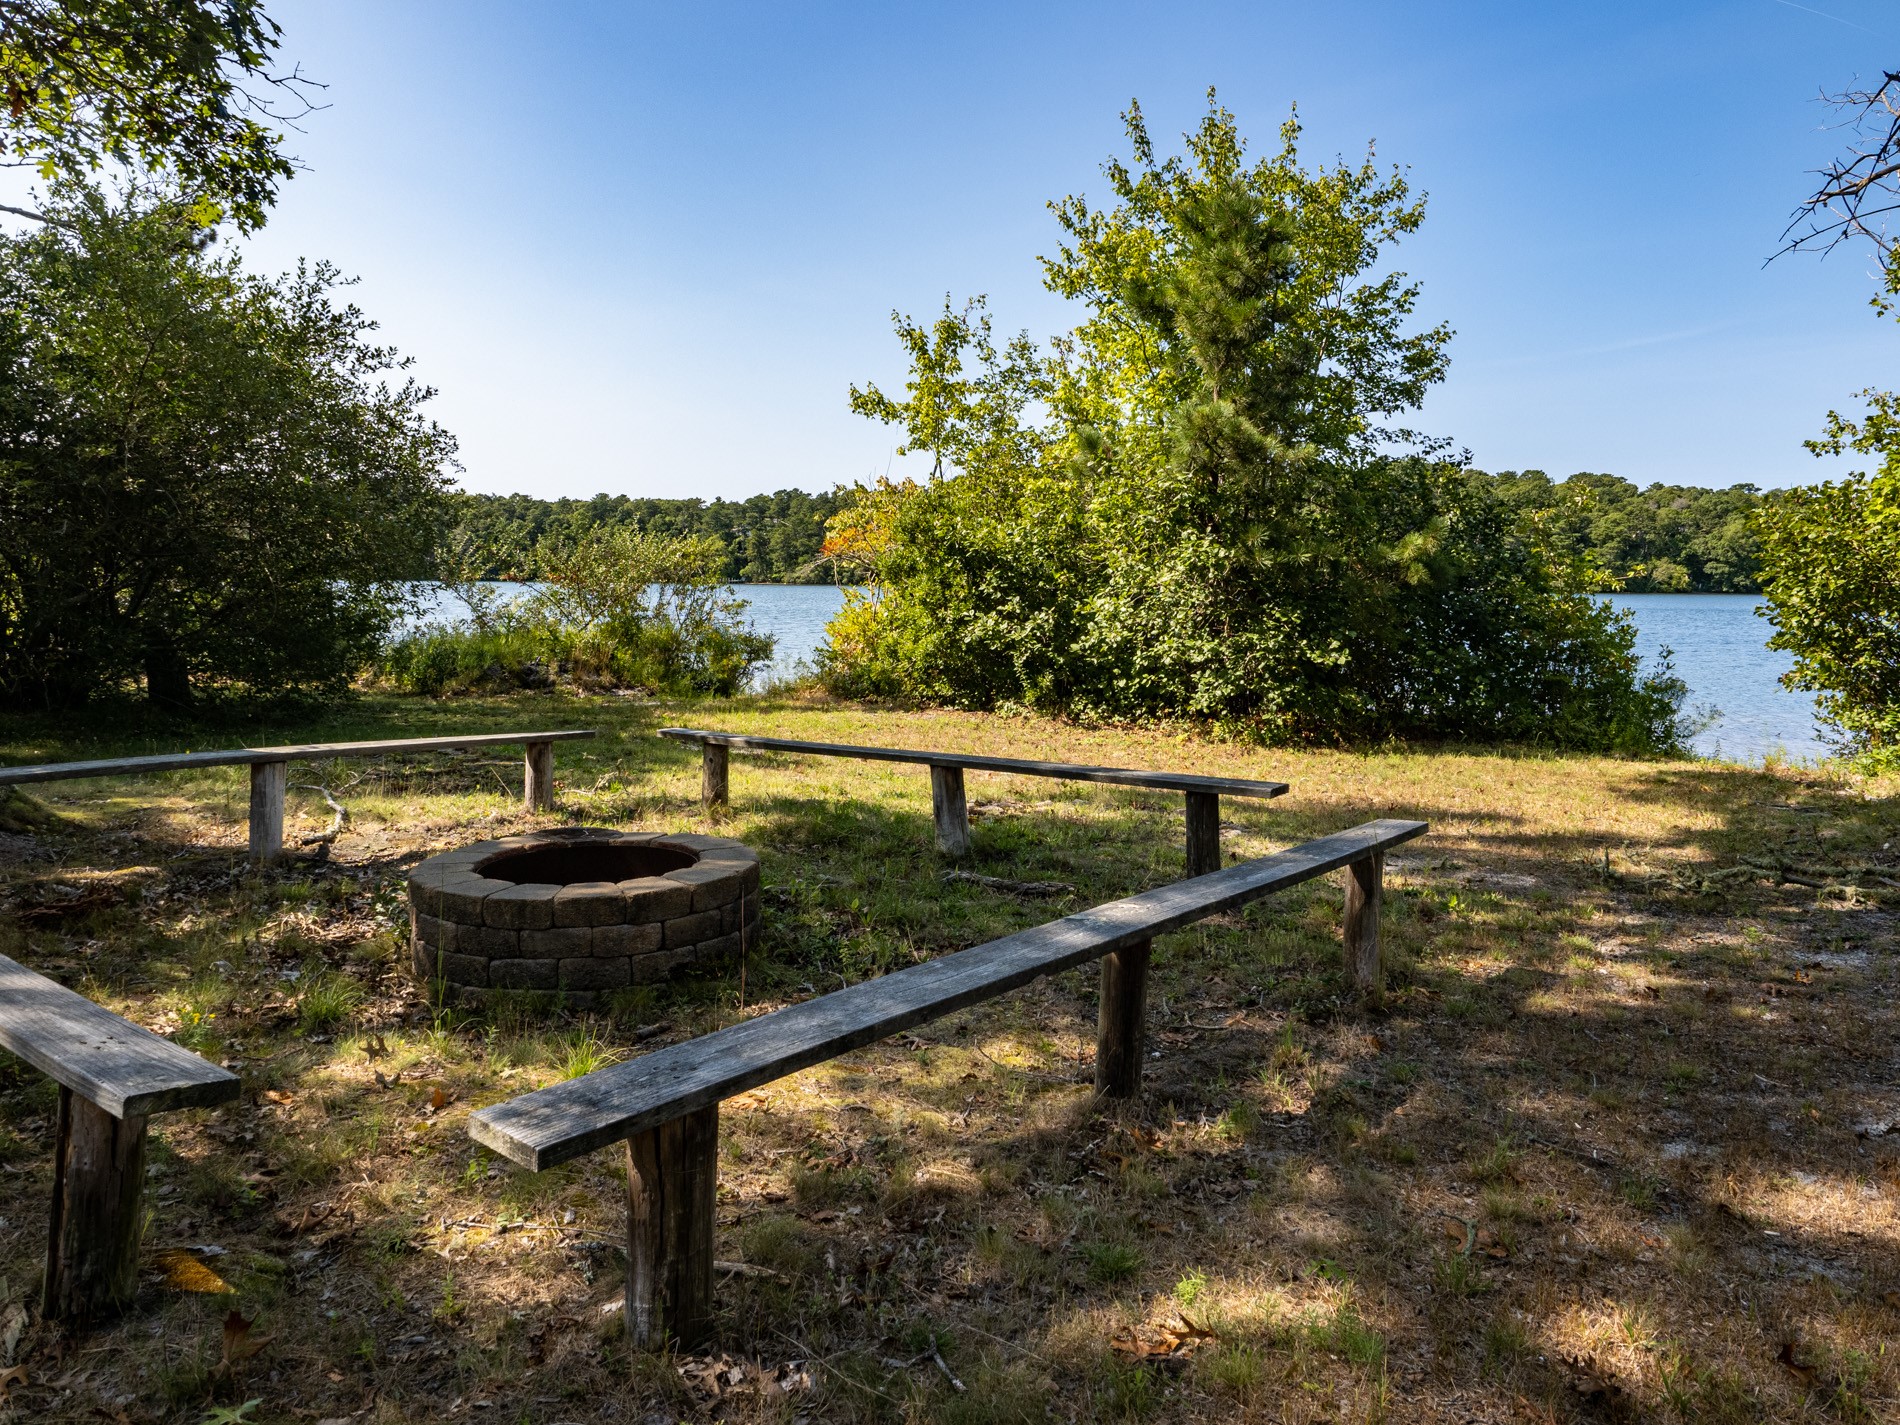 Benches around firepit and Long Pond